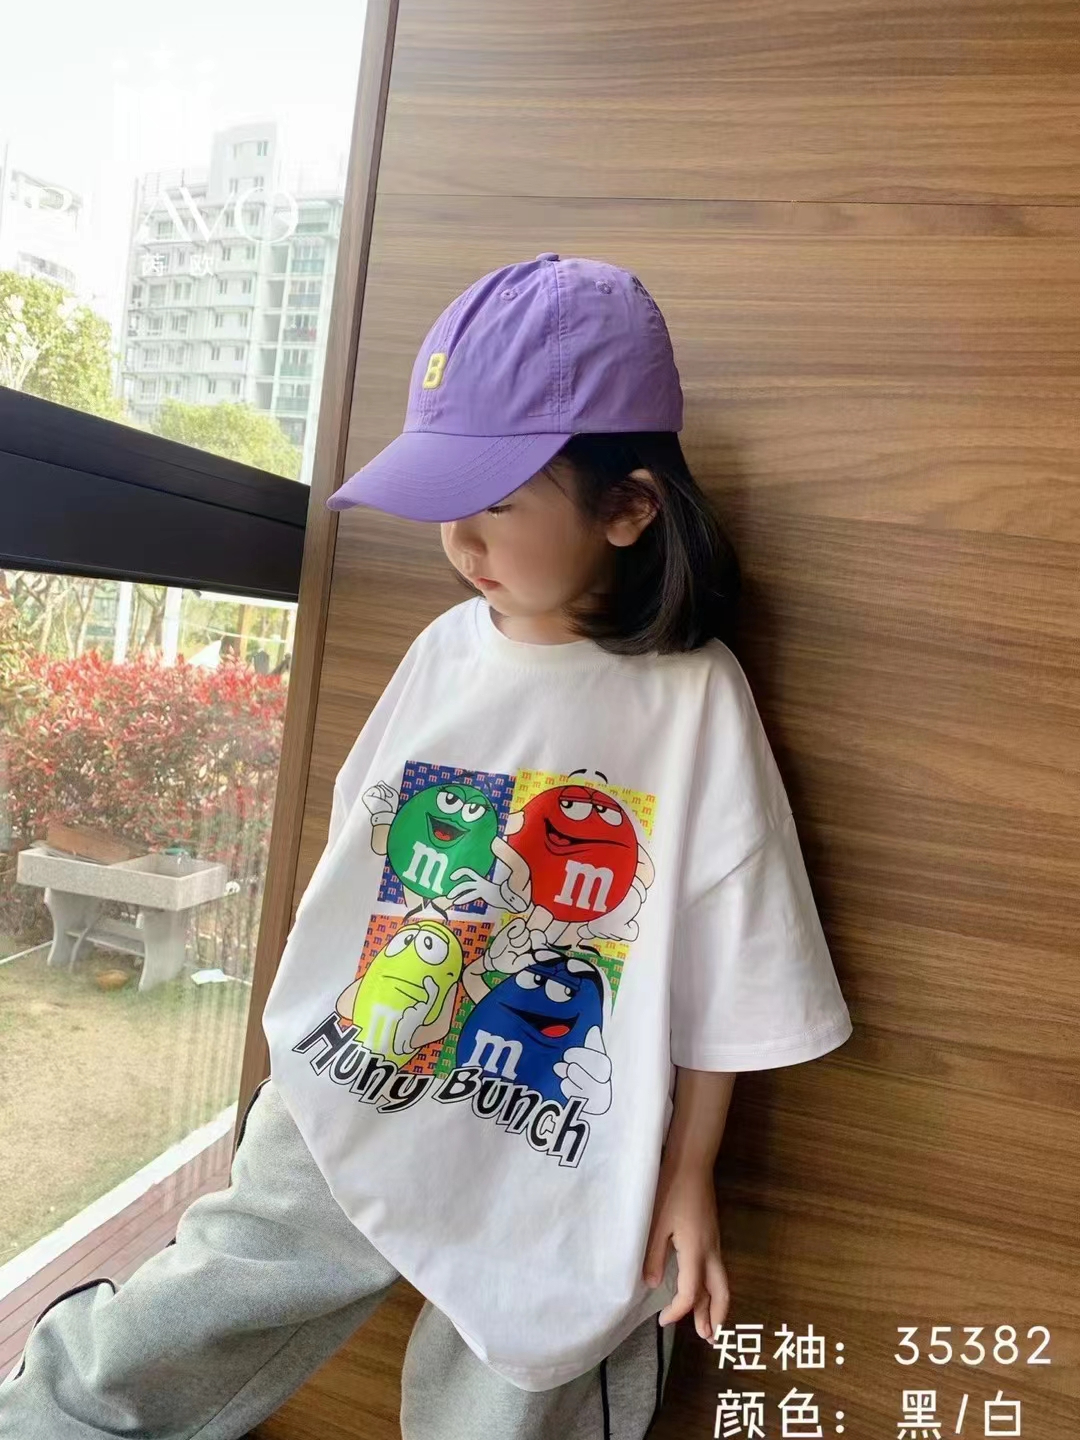 Pure cotton back wrap collar short-sleeved children's t-shirt summer children's T-shirt for boys and girls (100% combed cotton)